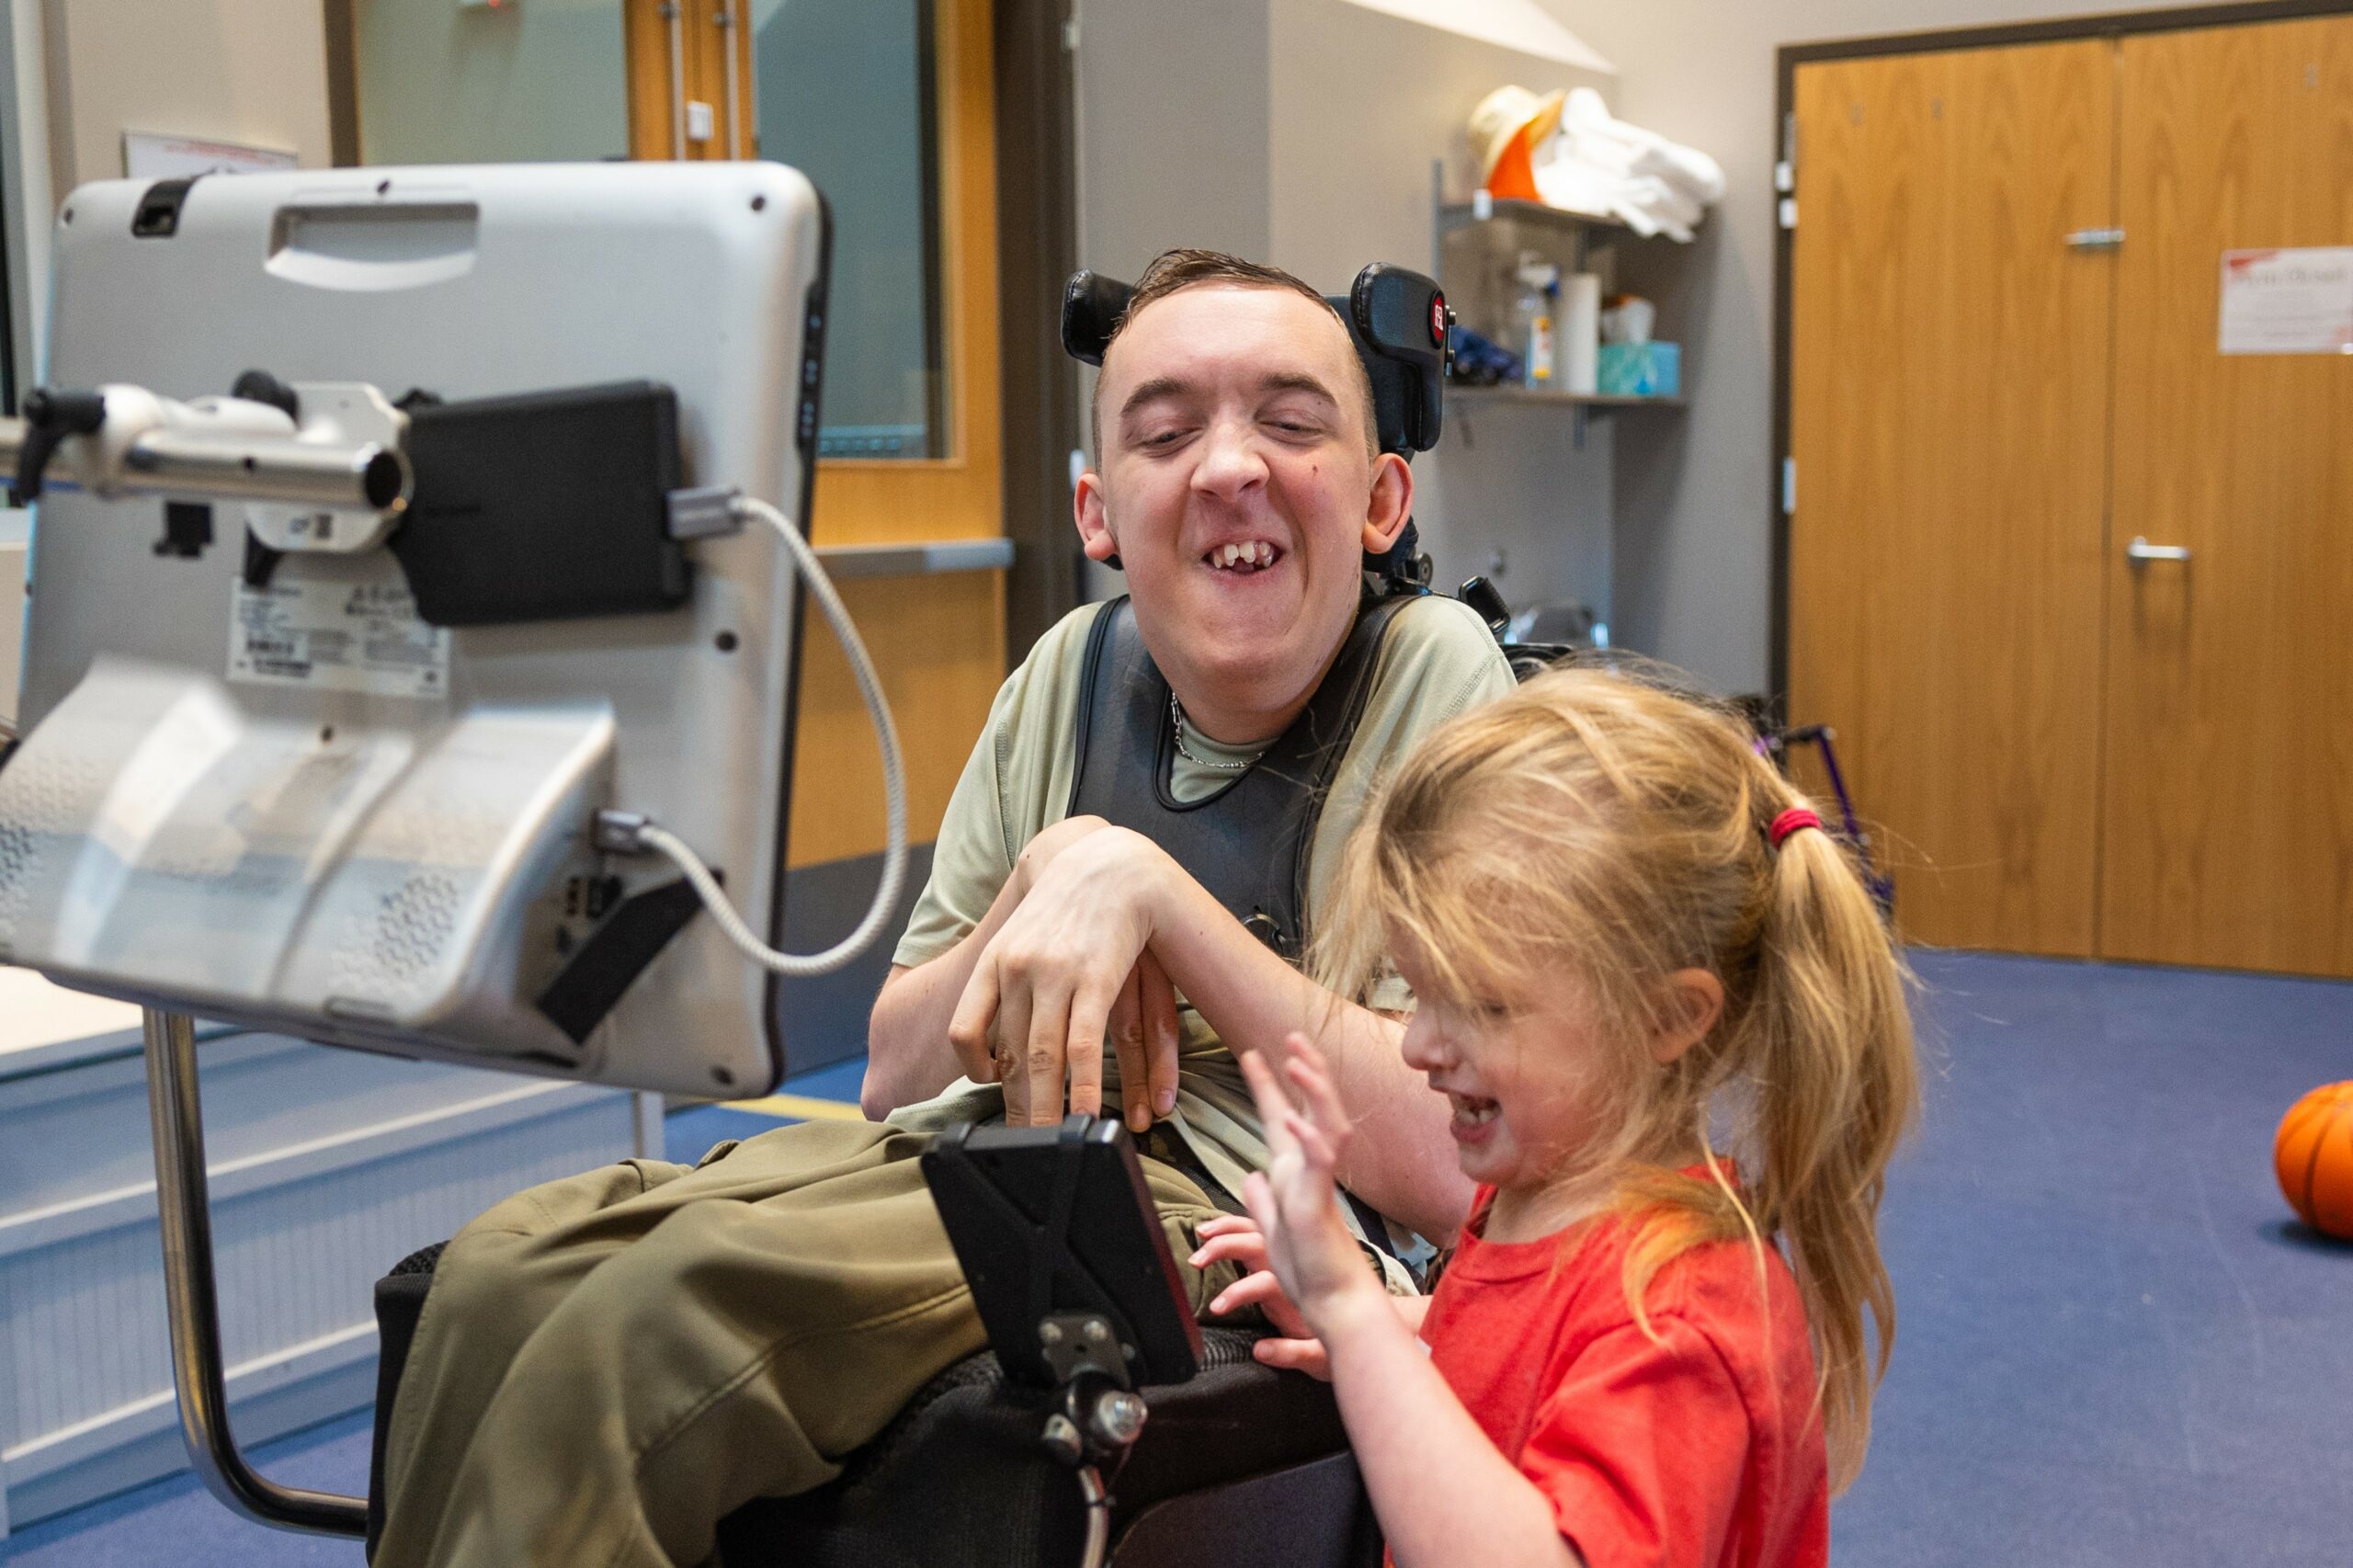 Young man with Cerebral Palsy using a voice output device to communicate with a young student.